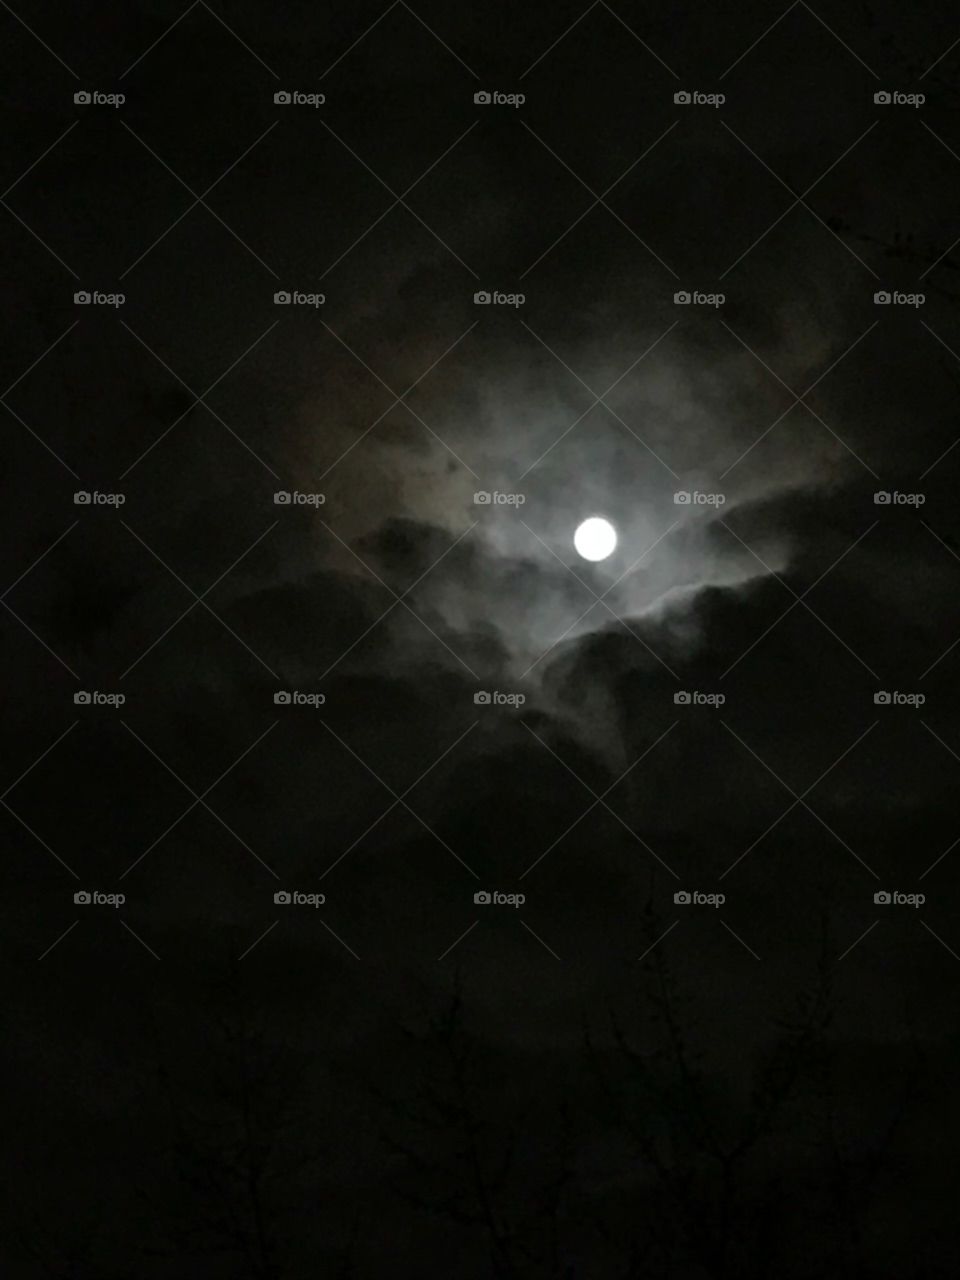 hole in the clouds showing the moon